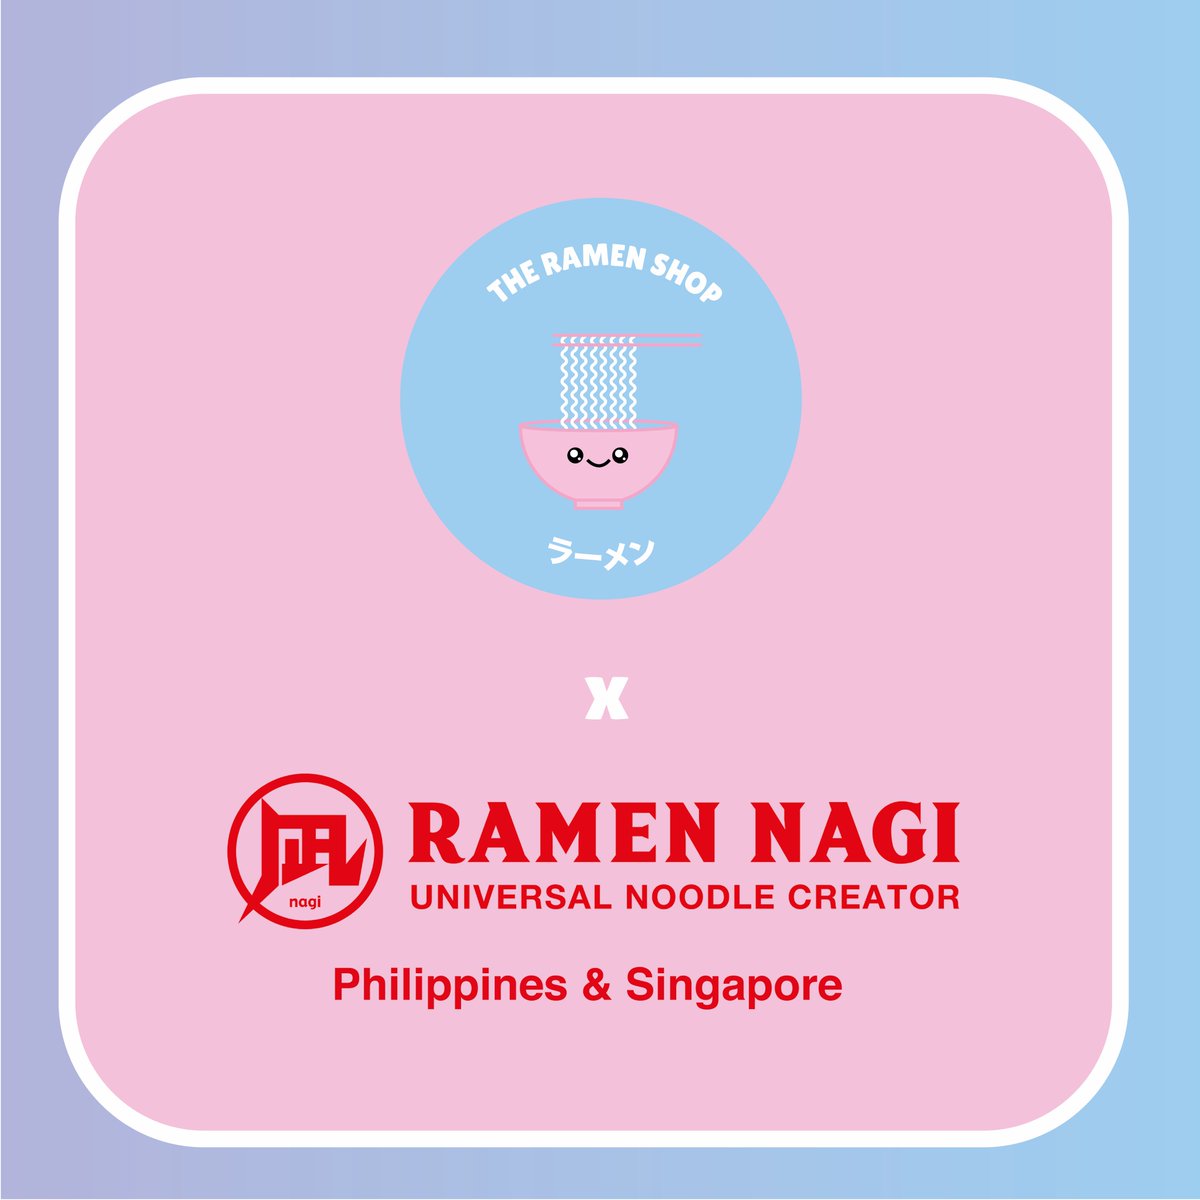 We are proud to announce our collaboration with a ramen shop franchise! 🍜 Ramen Nagi Philippines